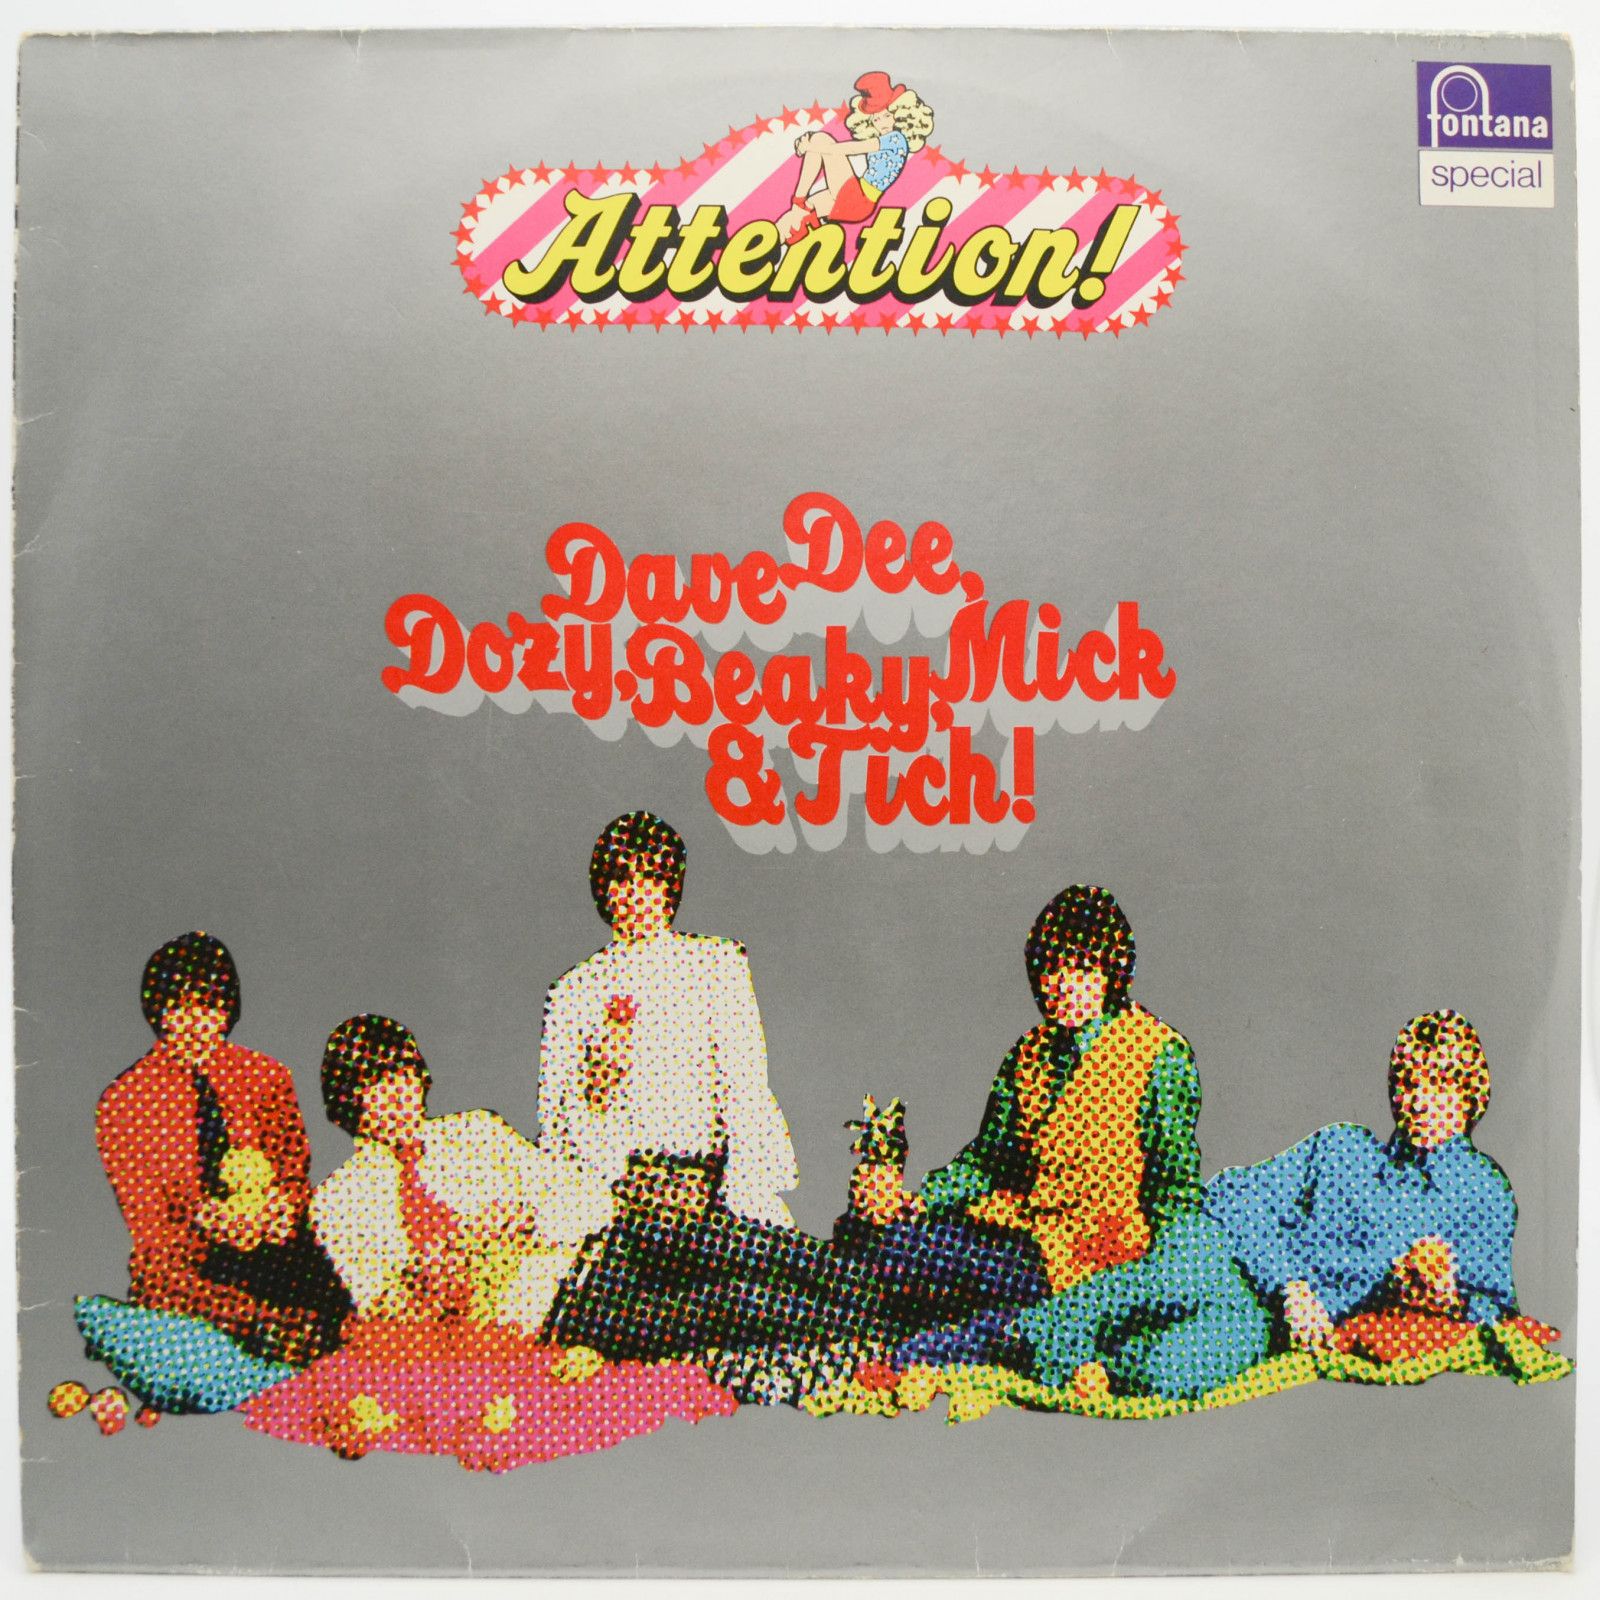 Dave Dee, Dozy, Beaky, Mick & Tich — Attention! Dave Dee, Dozy, Beaky, Mick & Tich, 1973